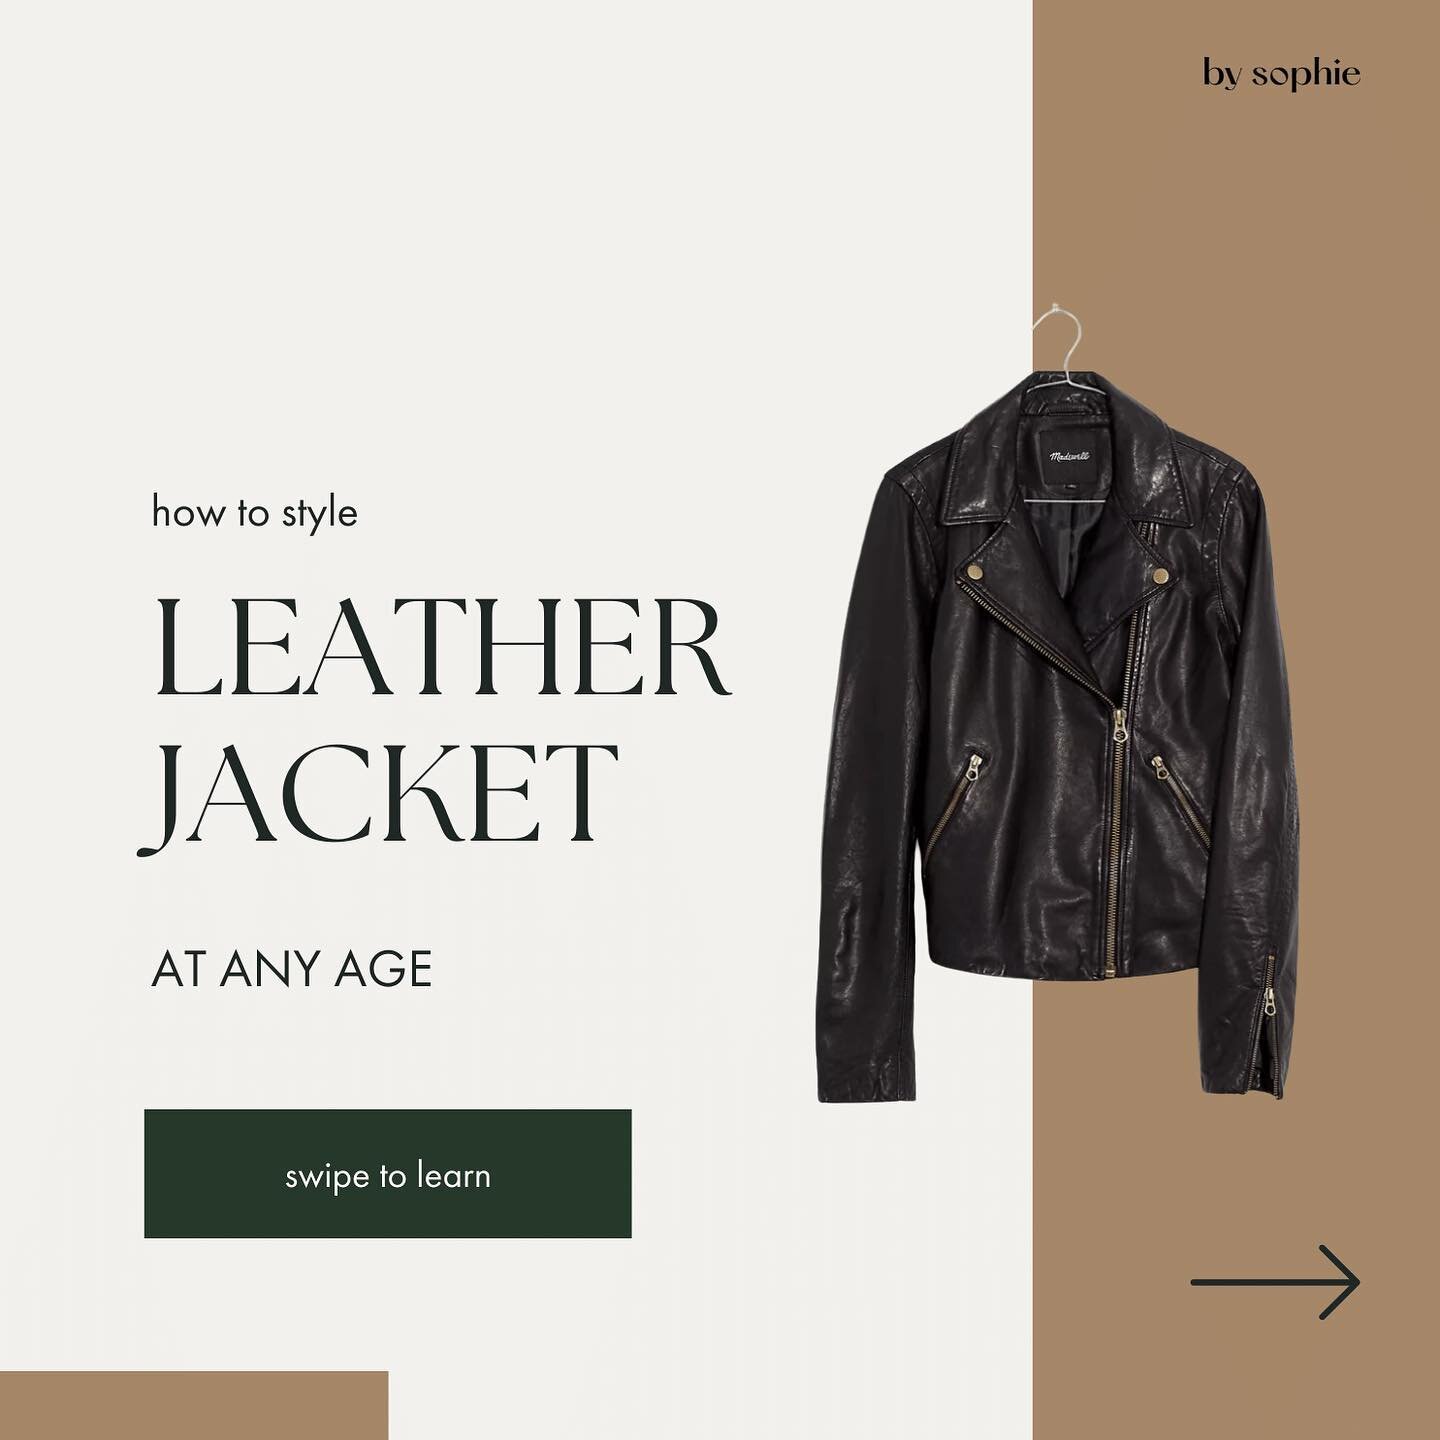 The leather jacket is a must have wardrobe staple. 🔥It is typically a slimmer fitting outerwear option that acts as a layer in all the right ways. This jacket can be casual or dressy, paired with skirts or pants, and truly looks good on women of all